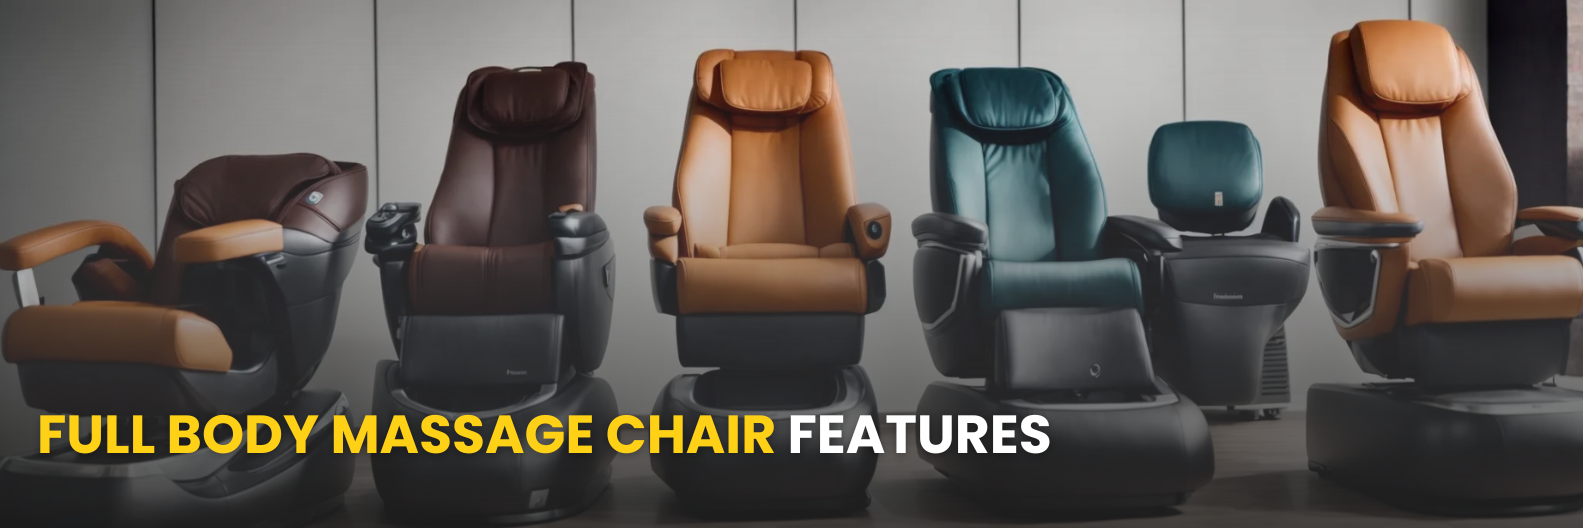 Explore a variety of full body massage chairs, each with unique options and features, to find your ideal match for the ultimate relaxation experience.